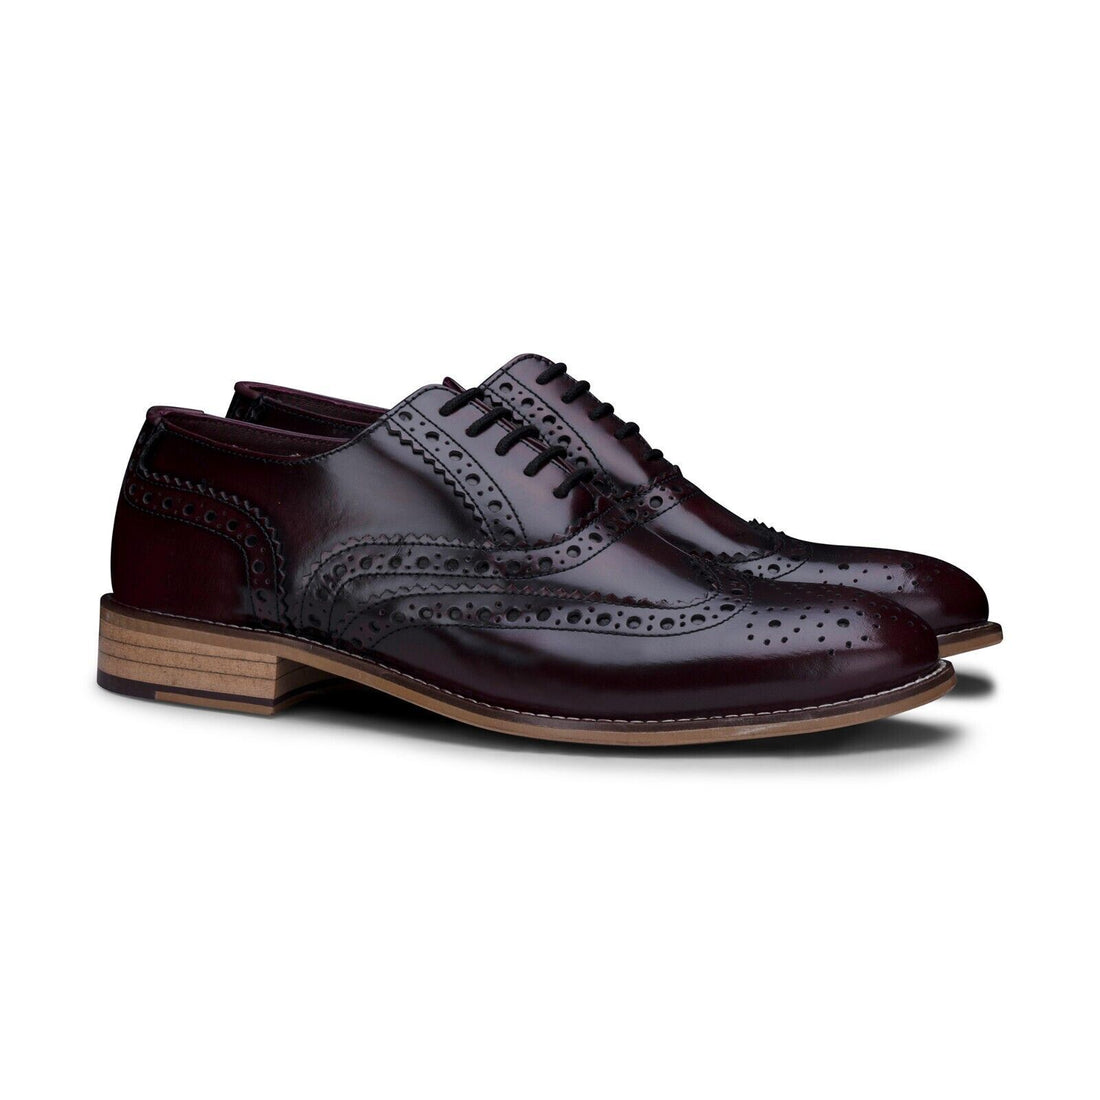 Mens Classic Oxford Maroon Leather Gatsby Brogue Shoes